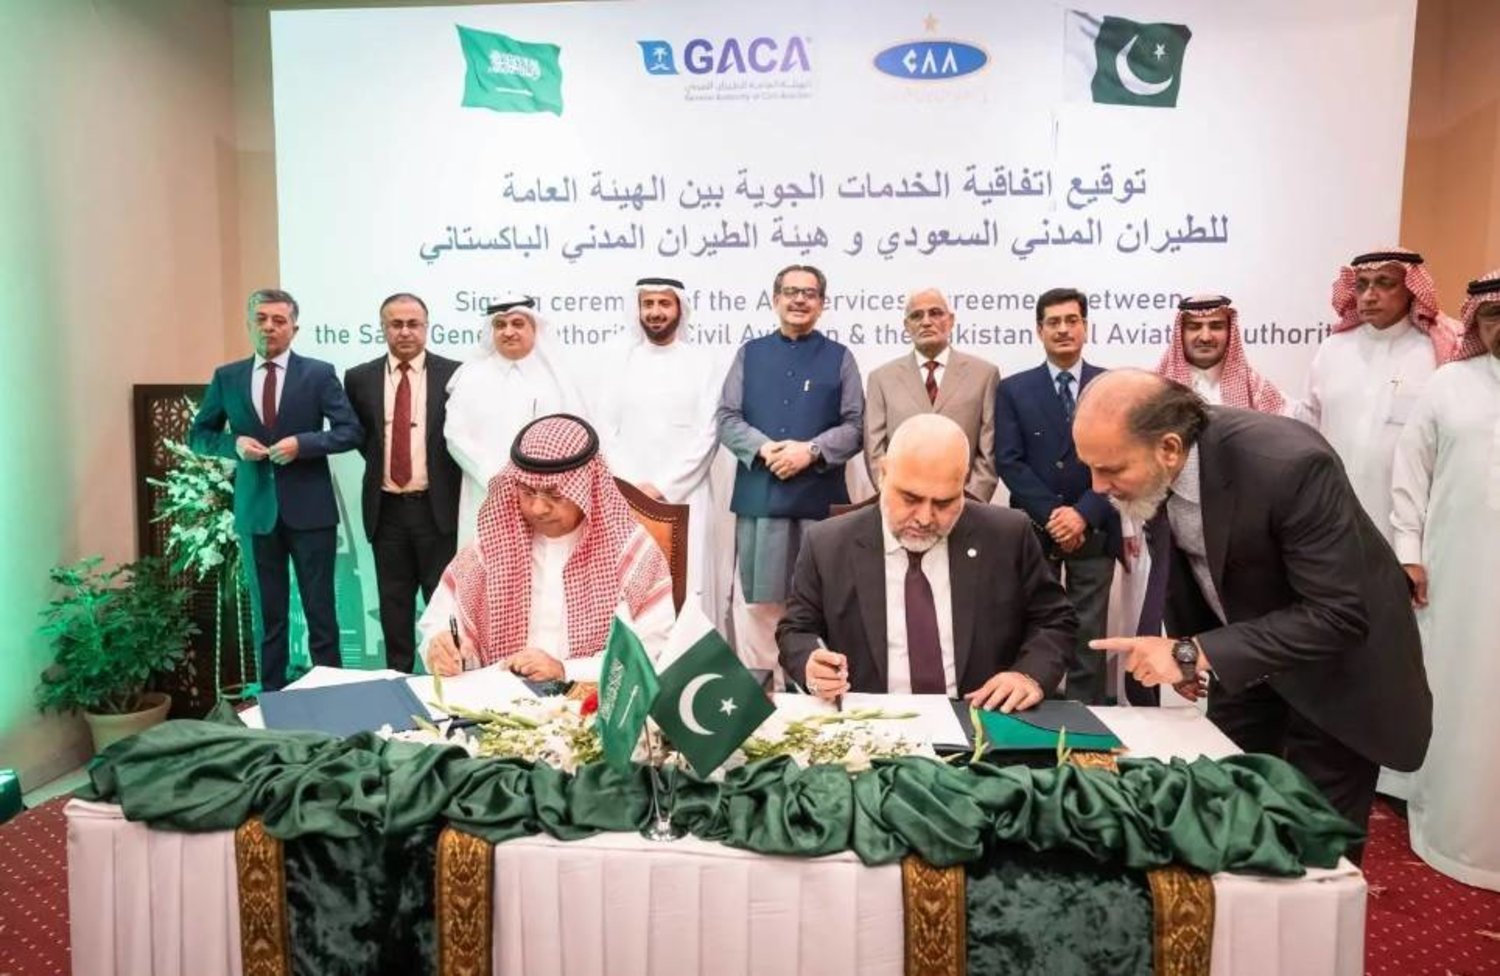 The signing of the deals came as President of the General Authority of Civil Aviation Abdulaziz bin Abdullah Al-Duailej met with civil aviation officials and specialists in both Pakistan and Bangladesh. SPA